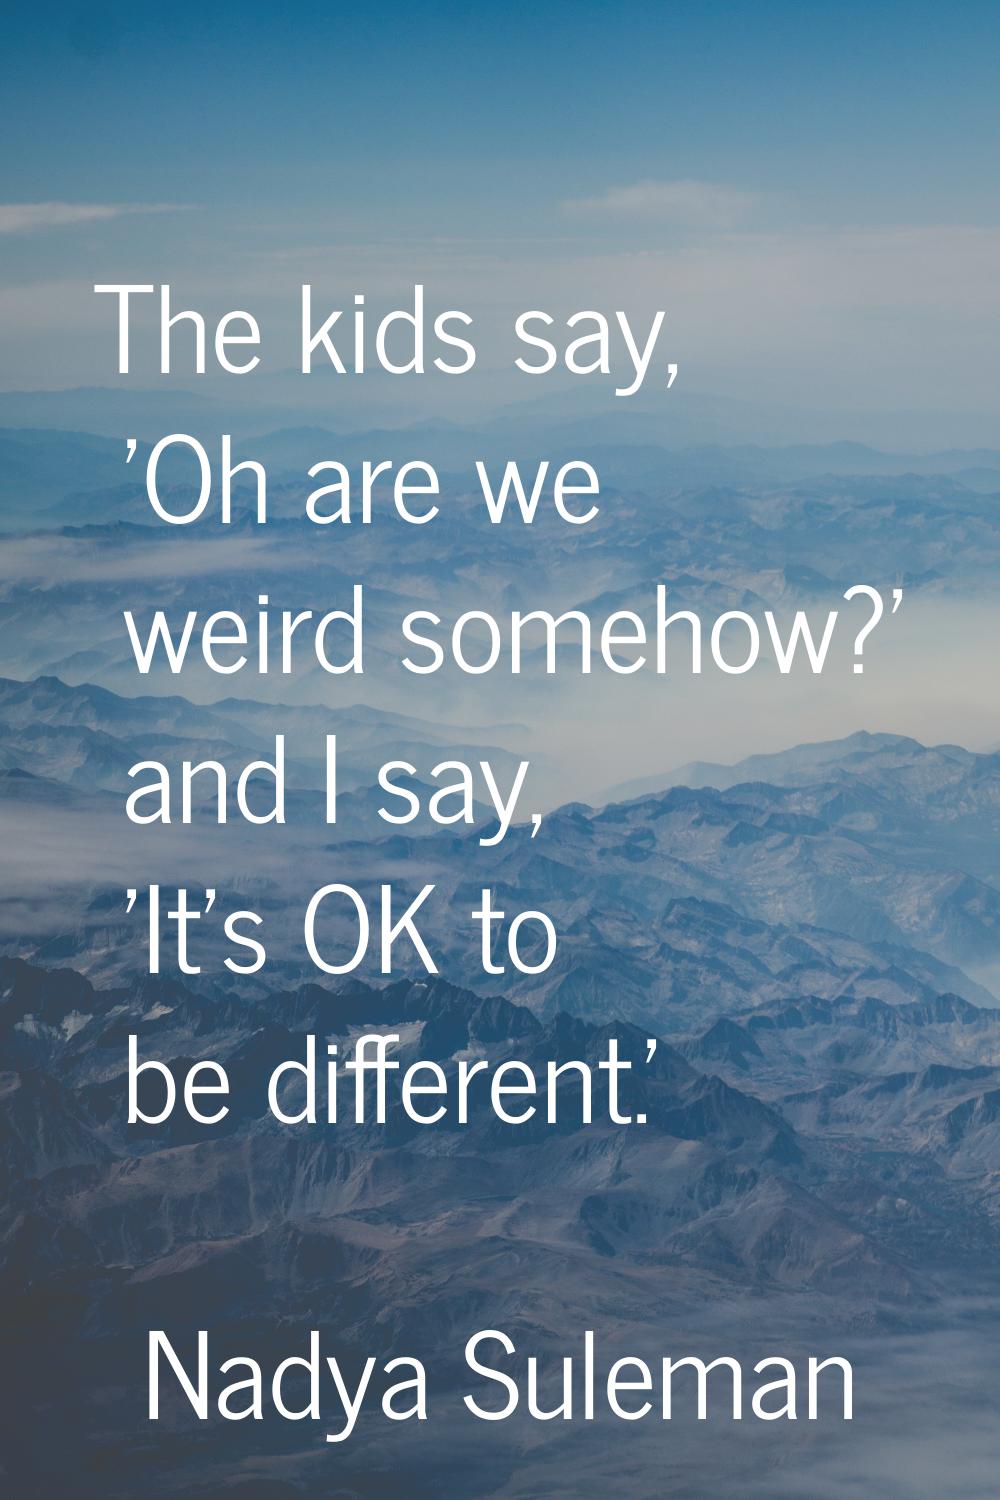 The kids say, 'Oh are we weird somehow?' and I say, 'It's OK to be different.'